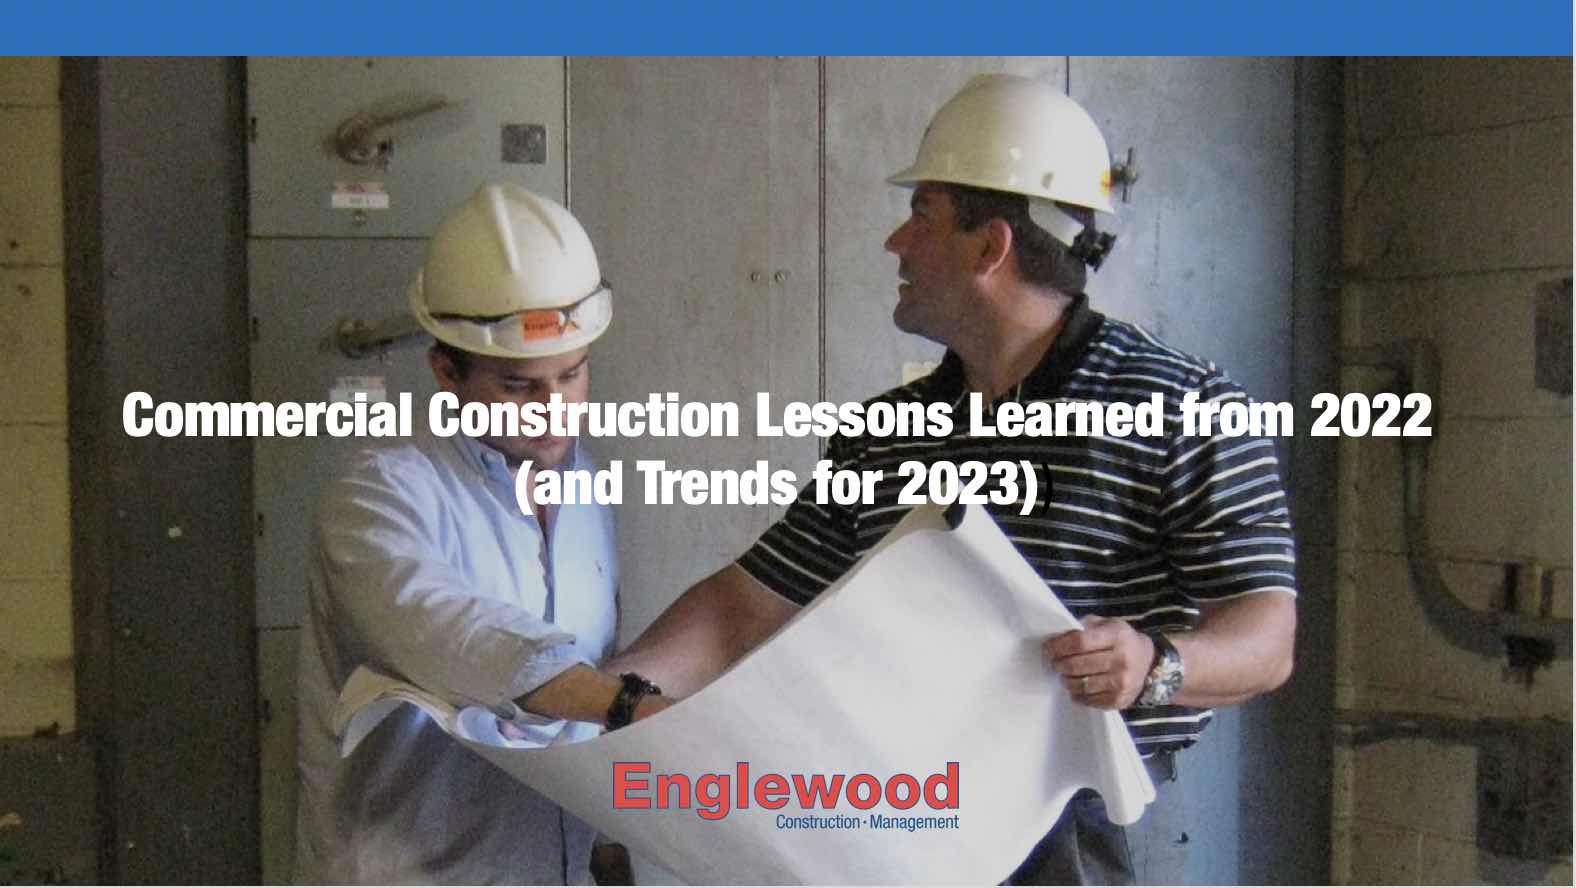 Commercial Construction Trends - Englewood Construction